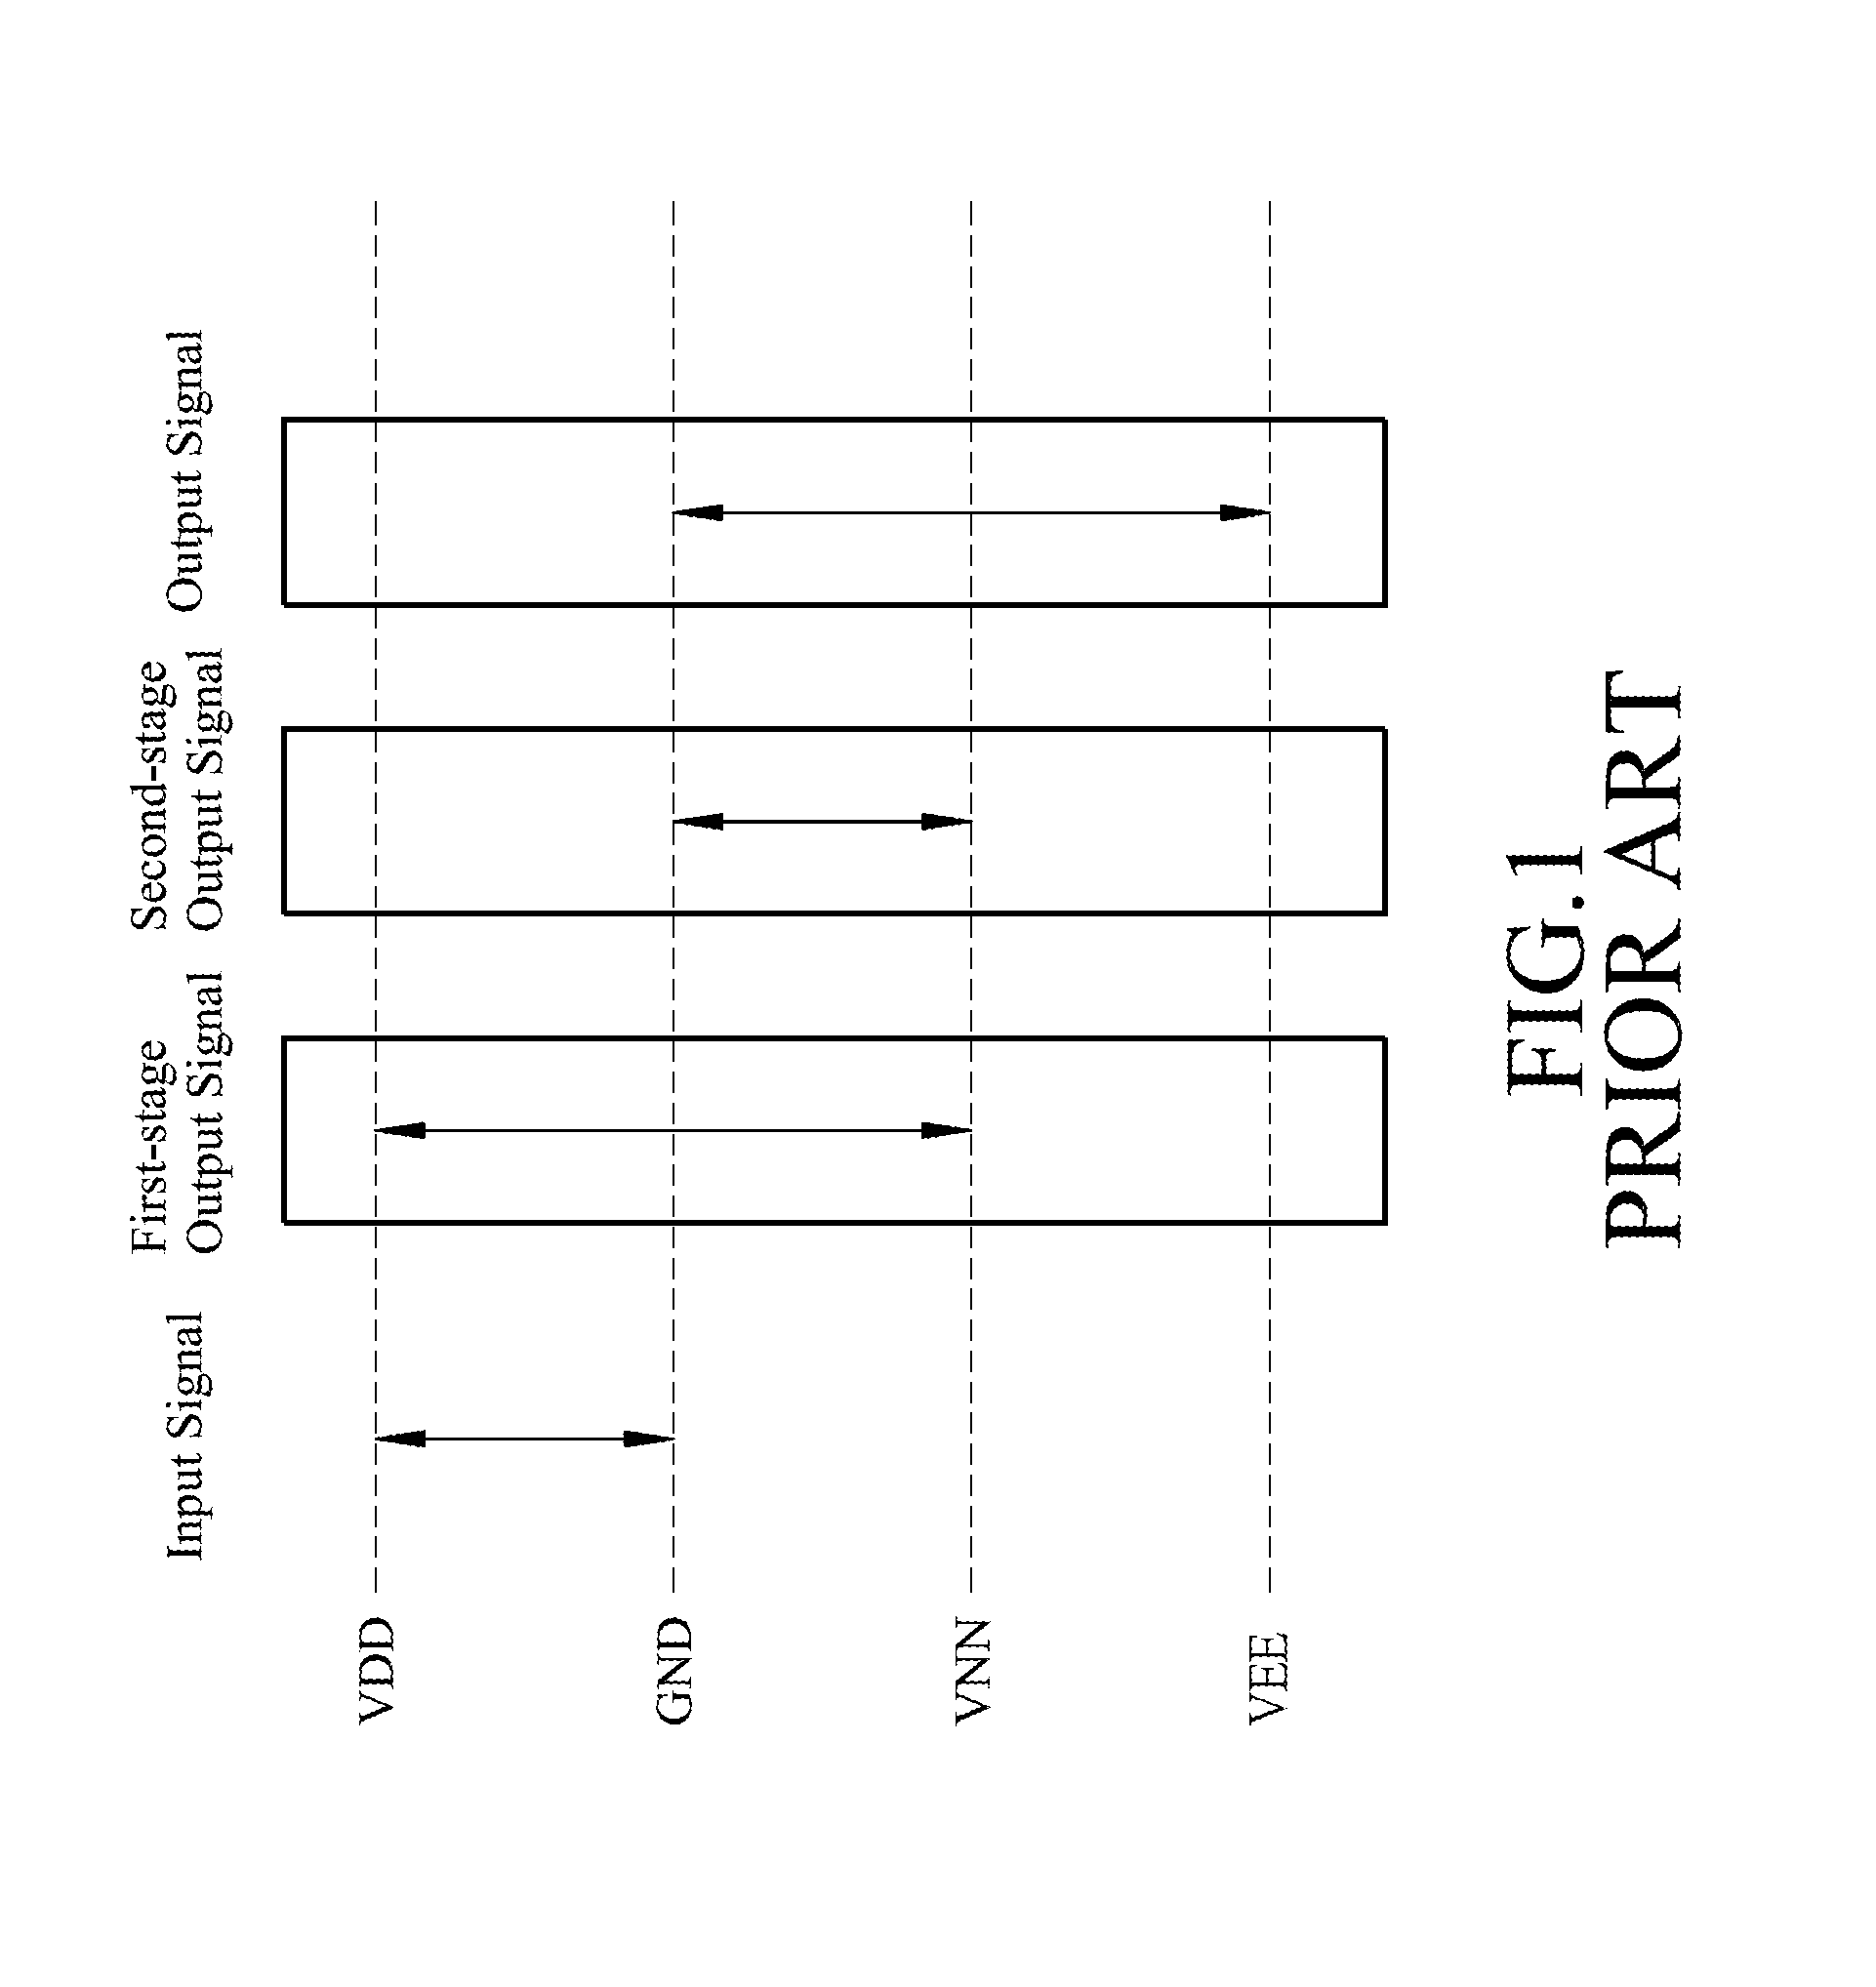 Voltage converting device